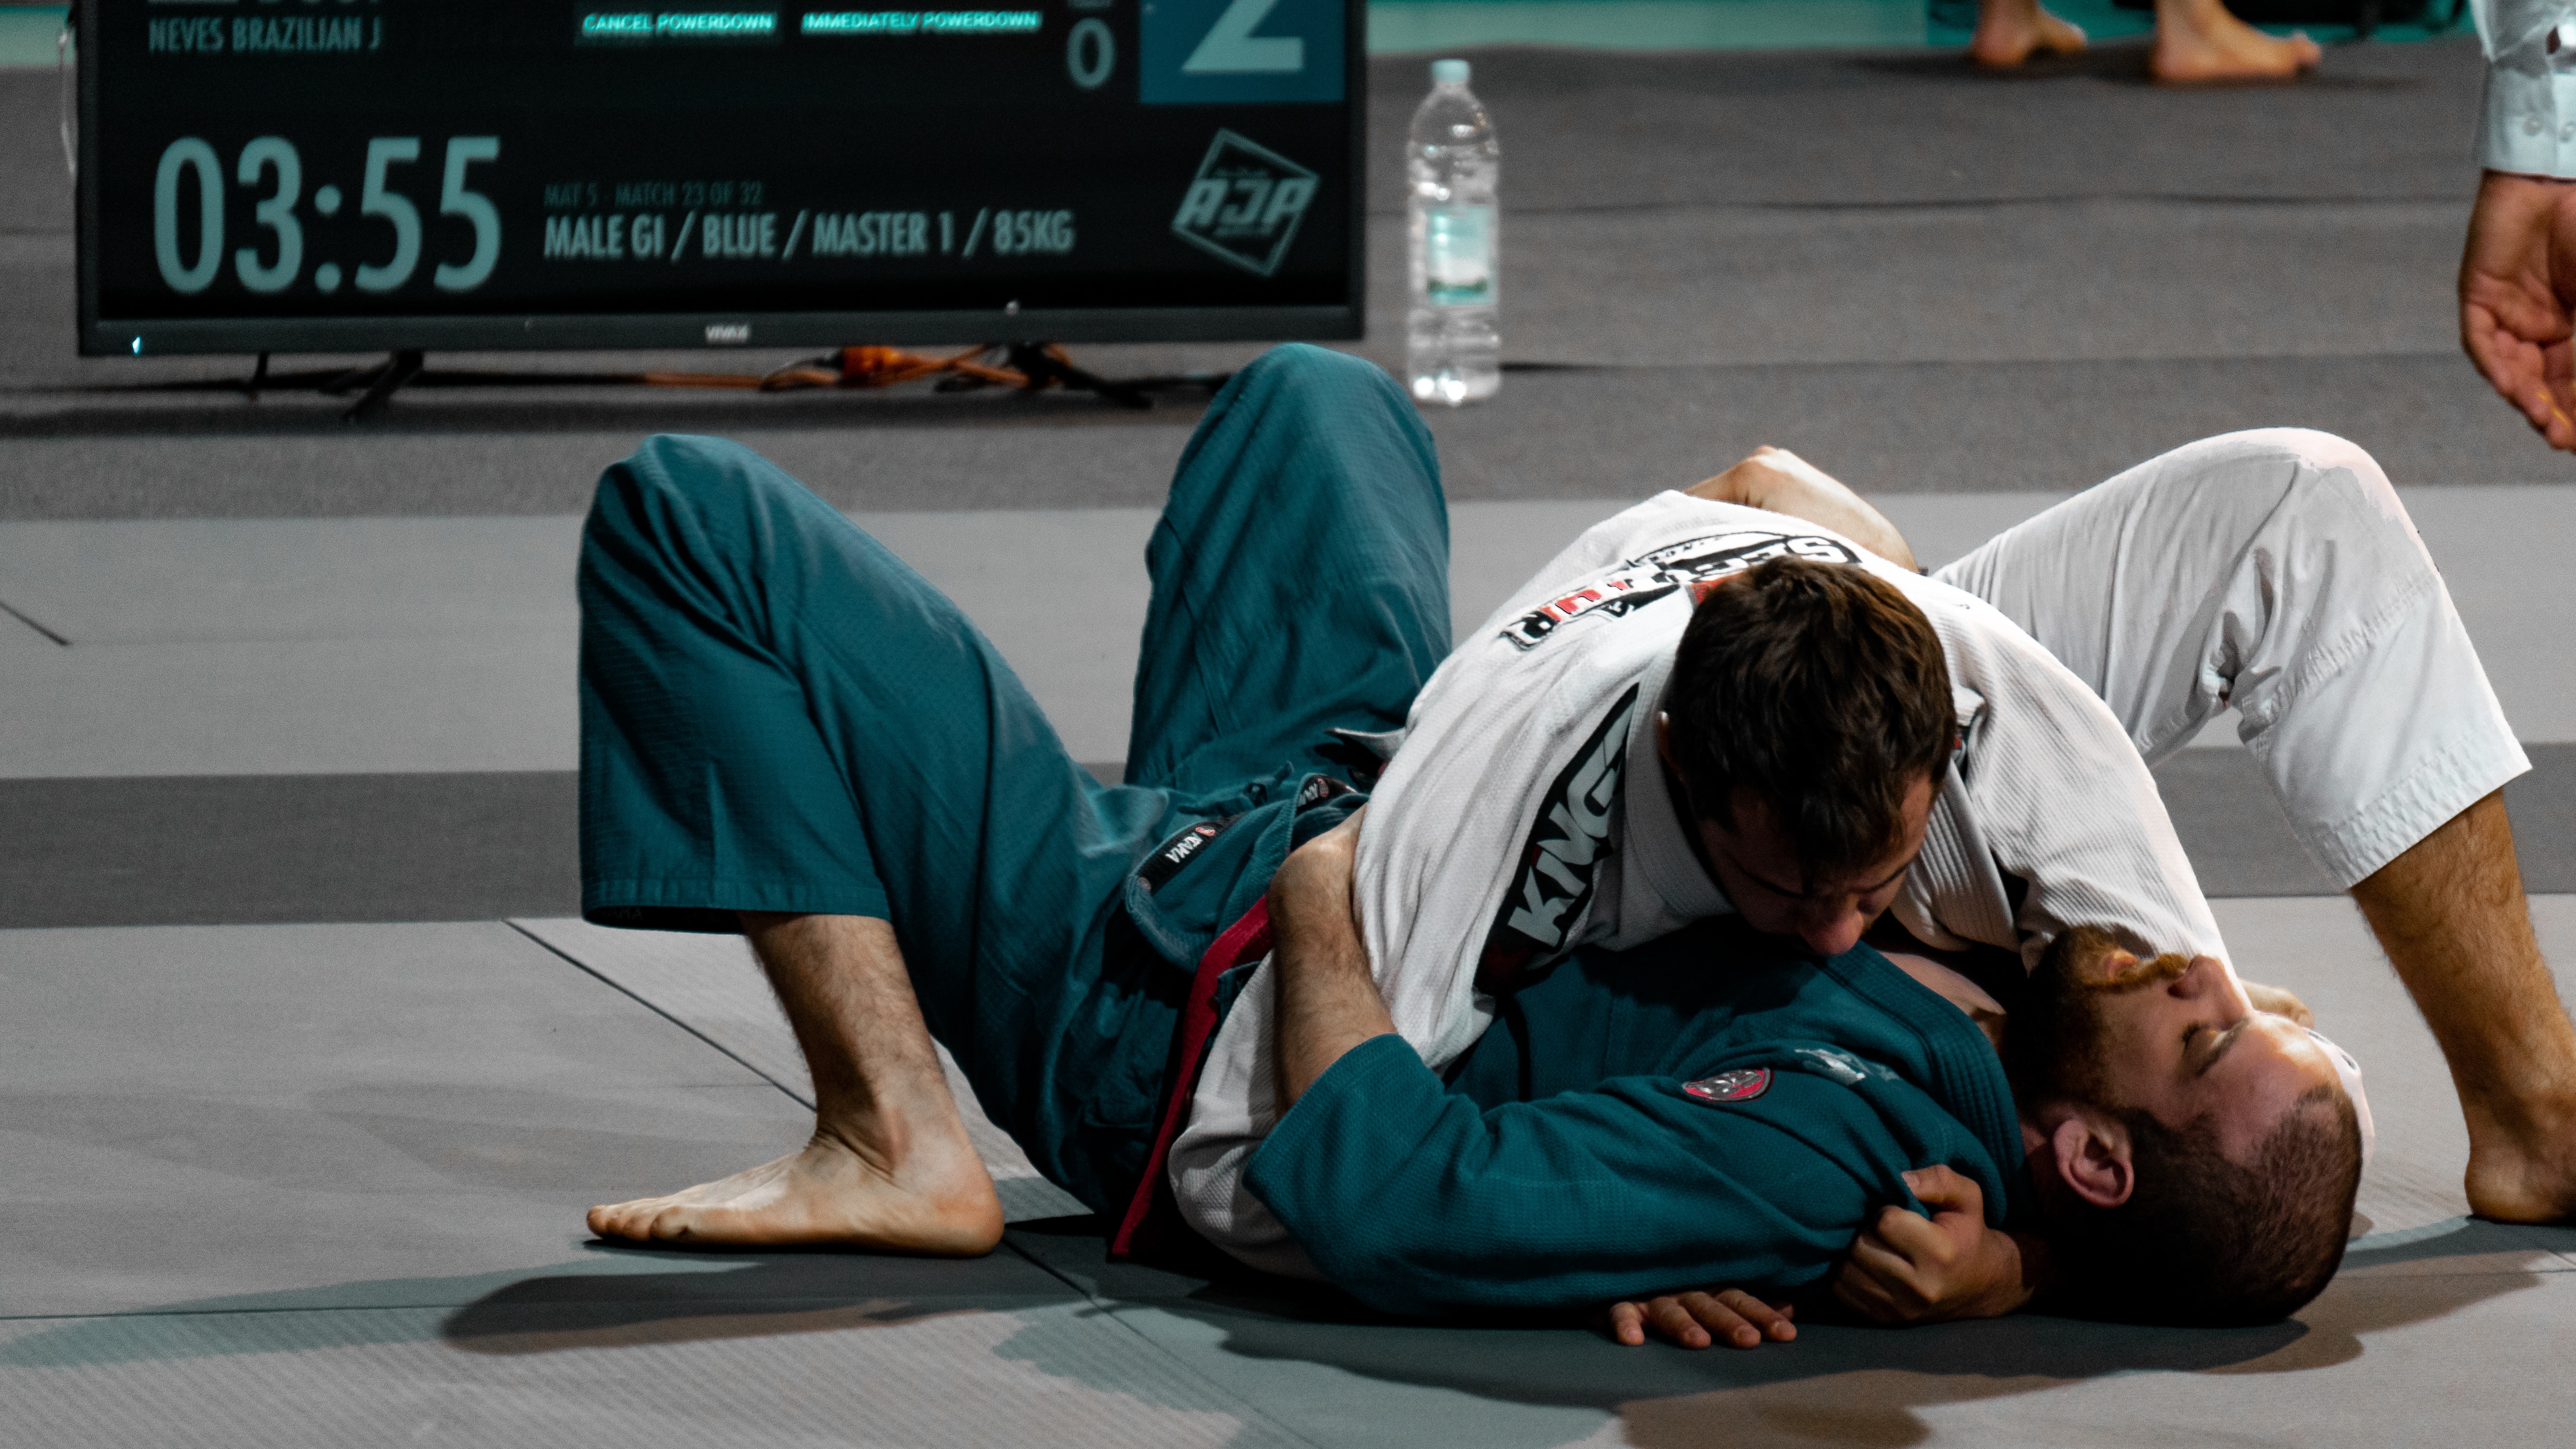 Abu Dhabi jiu-jitsu event is praised by Top athletes, after a thrilling final day